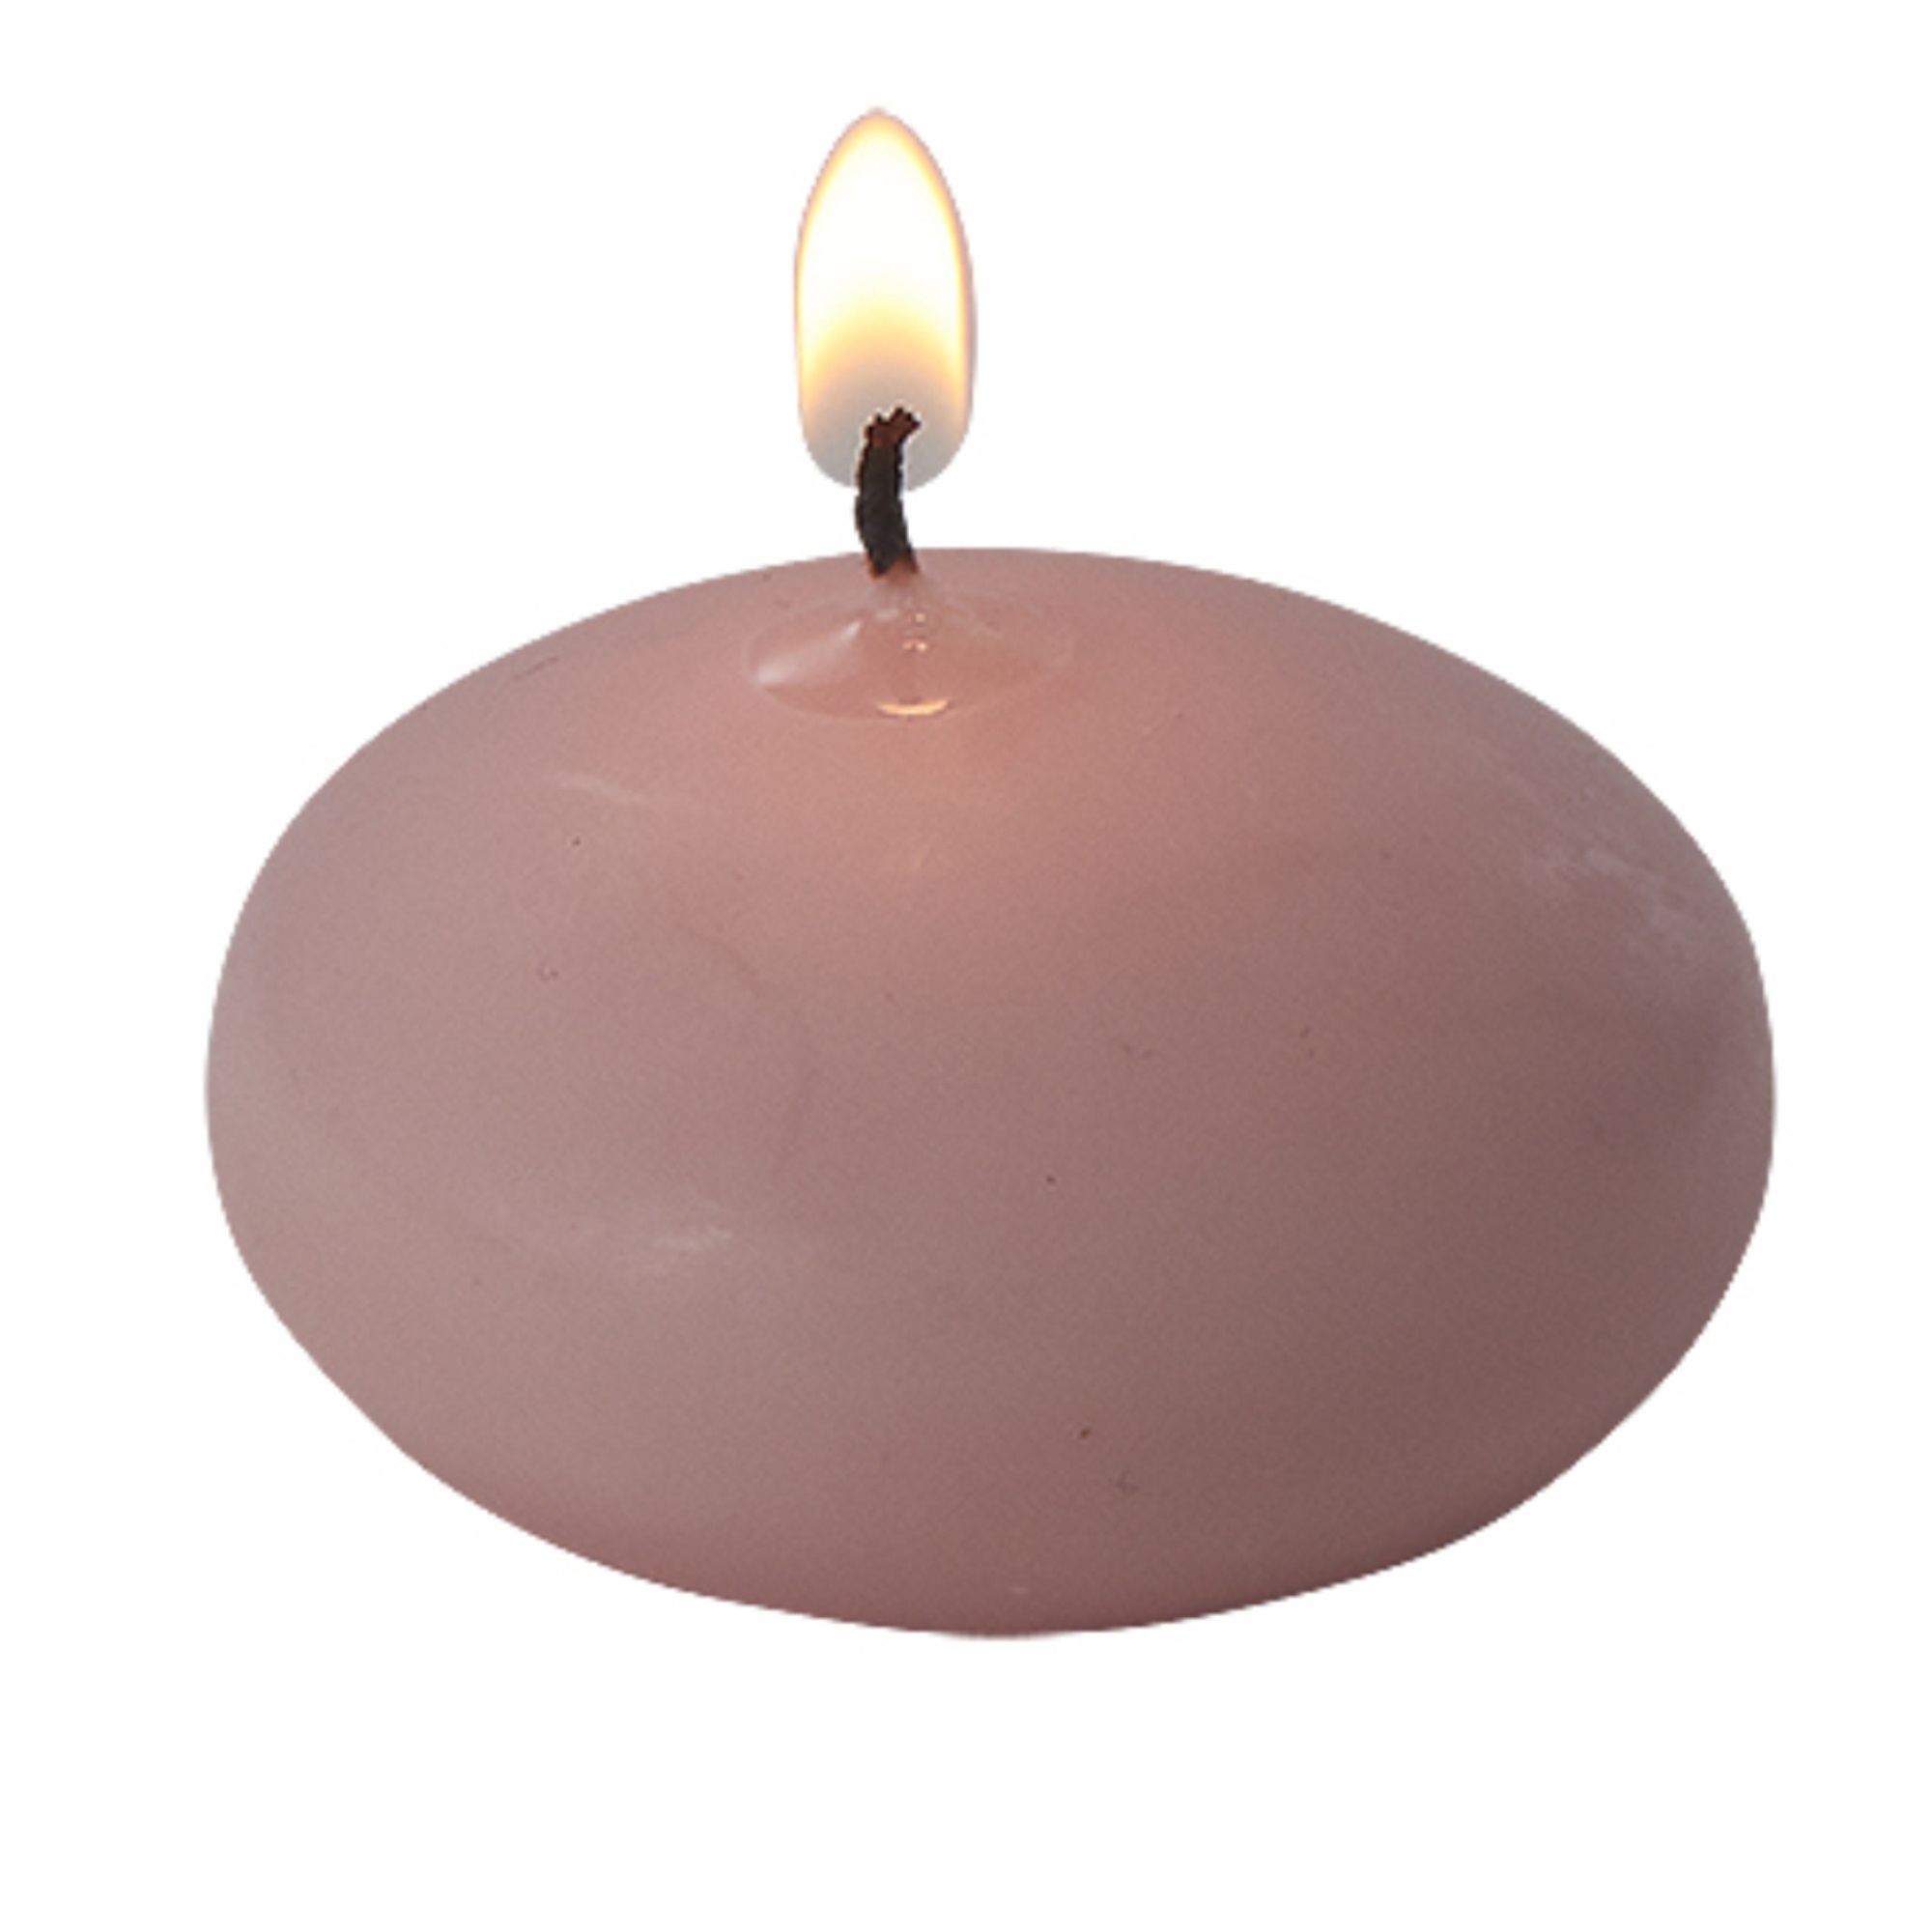 Brite Wick Unscented Floating Candles 2" 24pcs/box - Blush